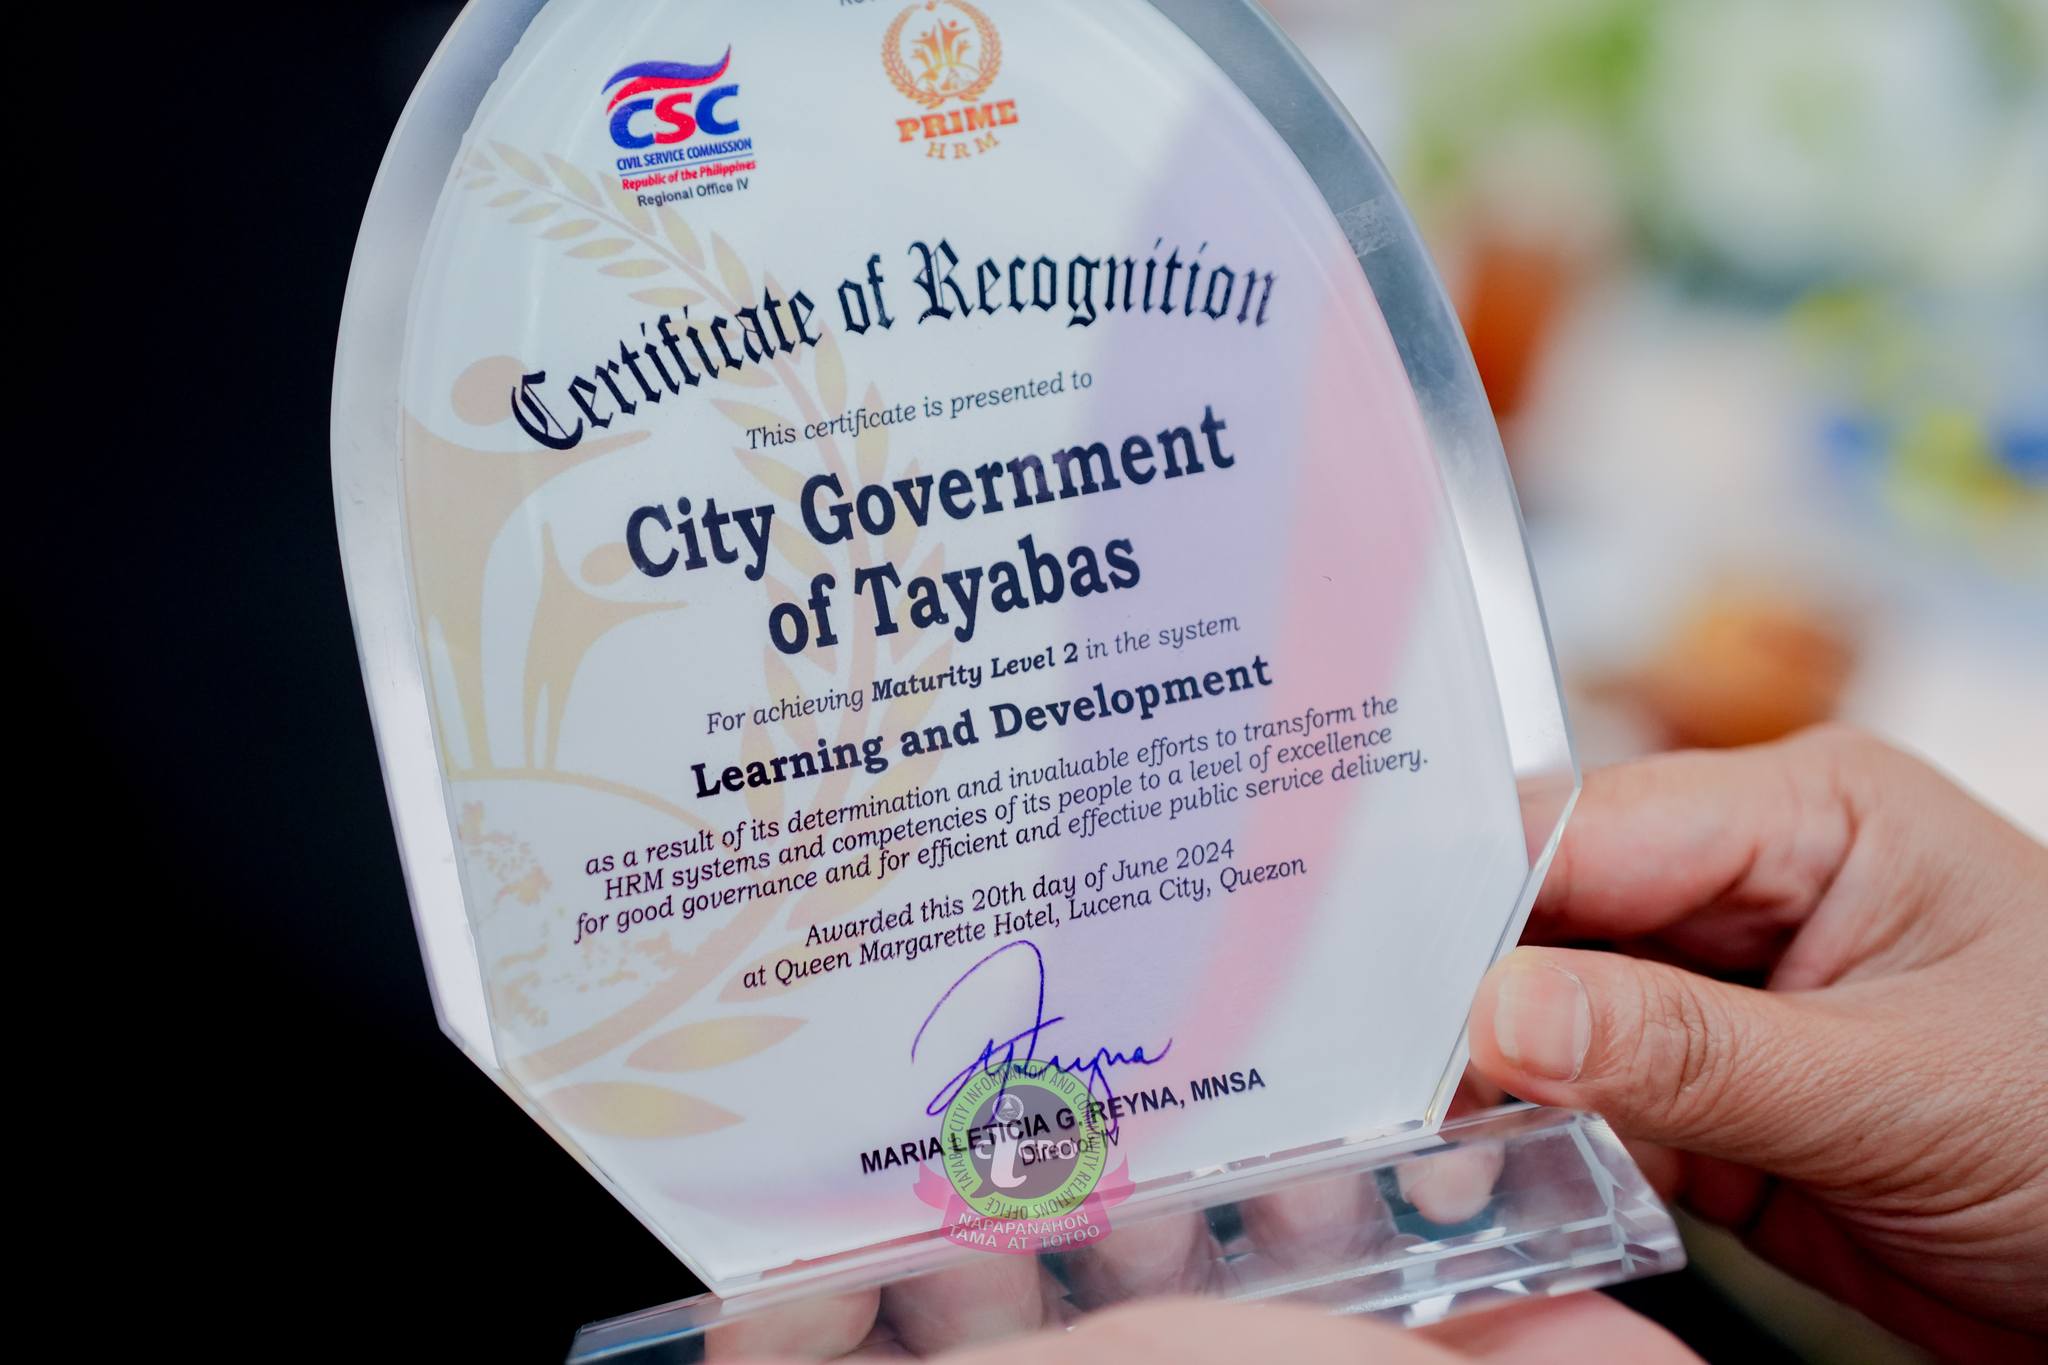 TINGNAN| LGU TAYABAS CITY, CERTIFIED MATURITY LEVEL 2 IN THE SYSTEM LEARNING DEVELOPMENT.